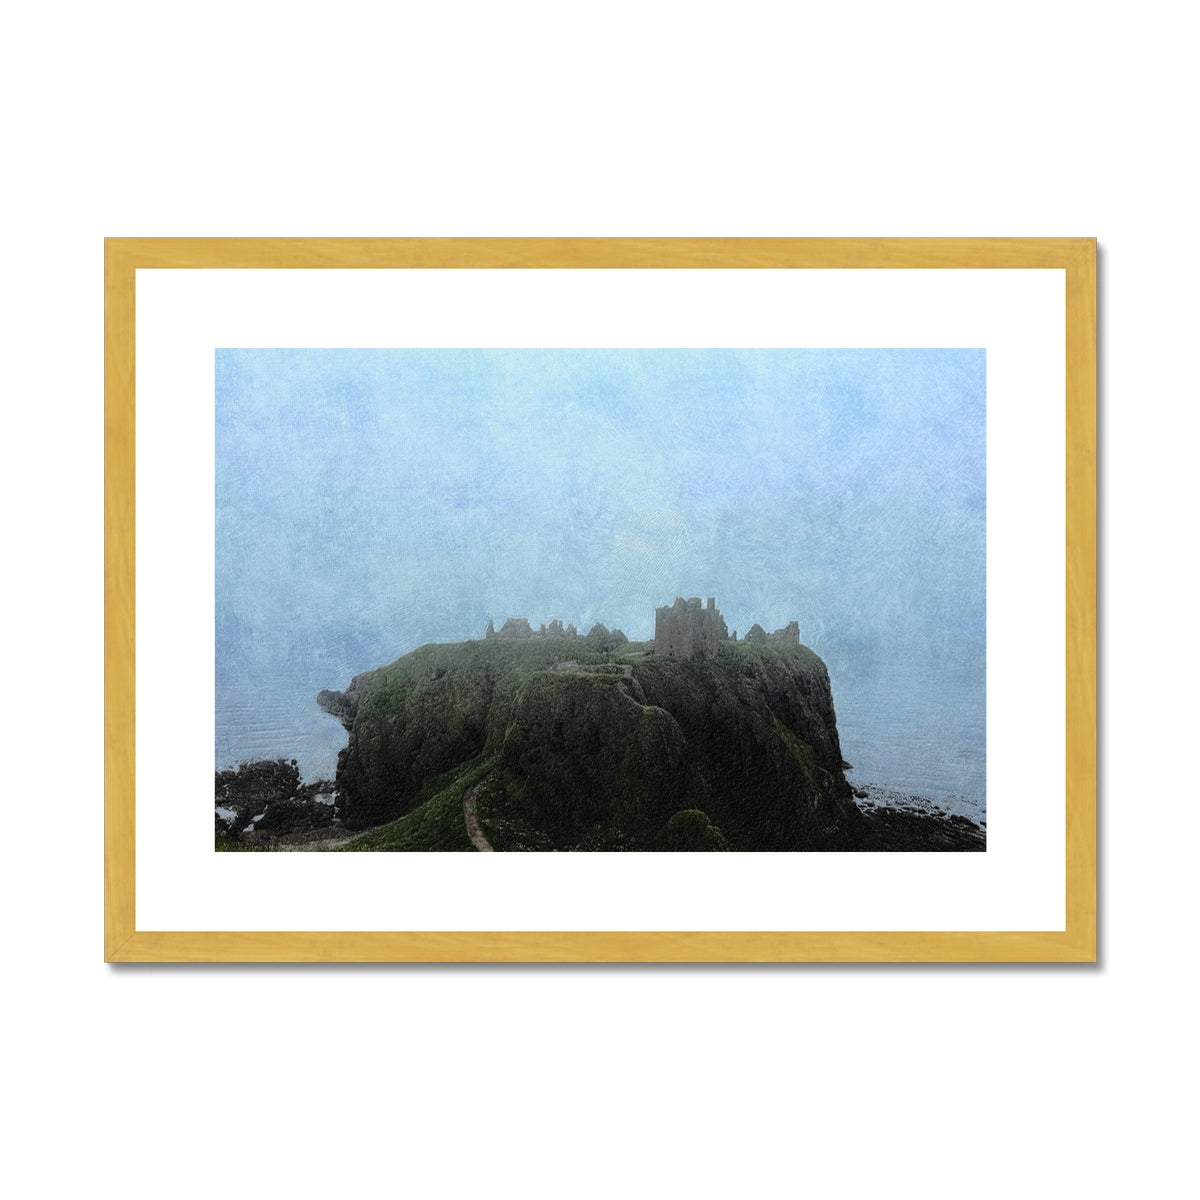 Dunnottar Castle Mist Painting | Antique Framed & Mounted Prints From Scotland-Antique Framed & Mounted Prints-Historic & Iconic Scotland Art Gallery-A2 Landscape-Gold Frame-Paintings, Prints, Homeware, Art Gifts From Scotland By Scottish Artist Kevin Hunter